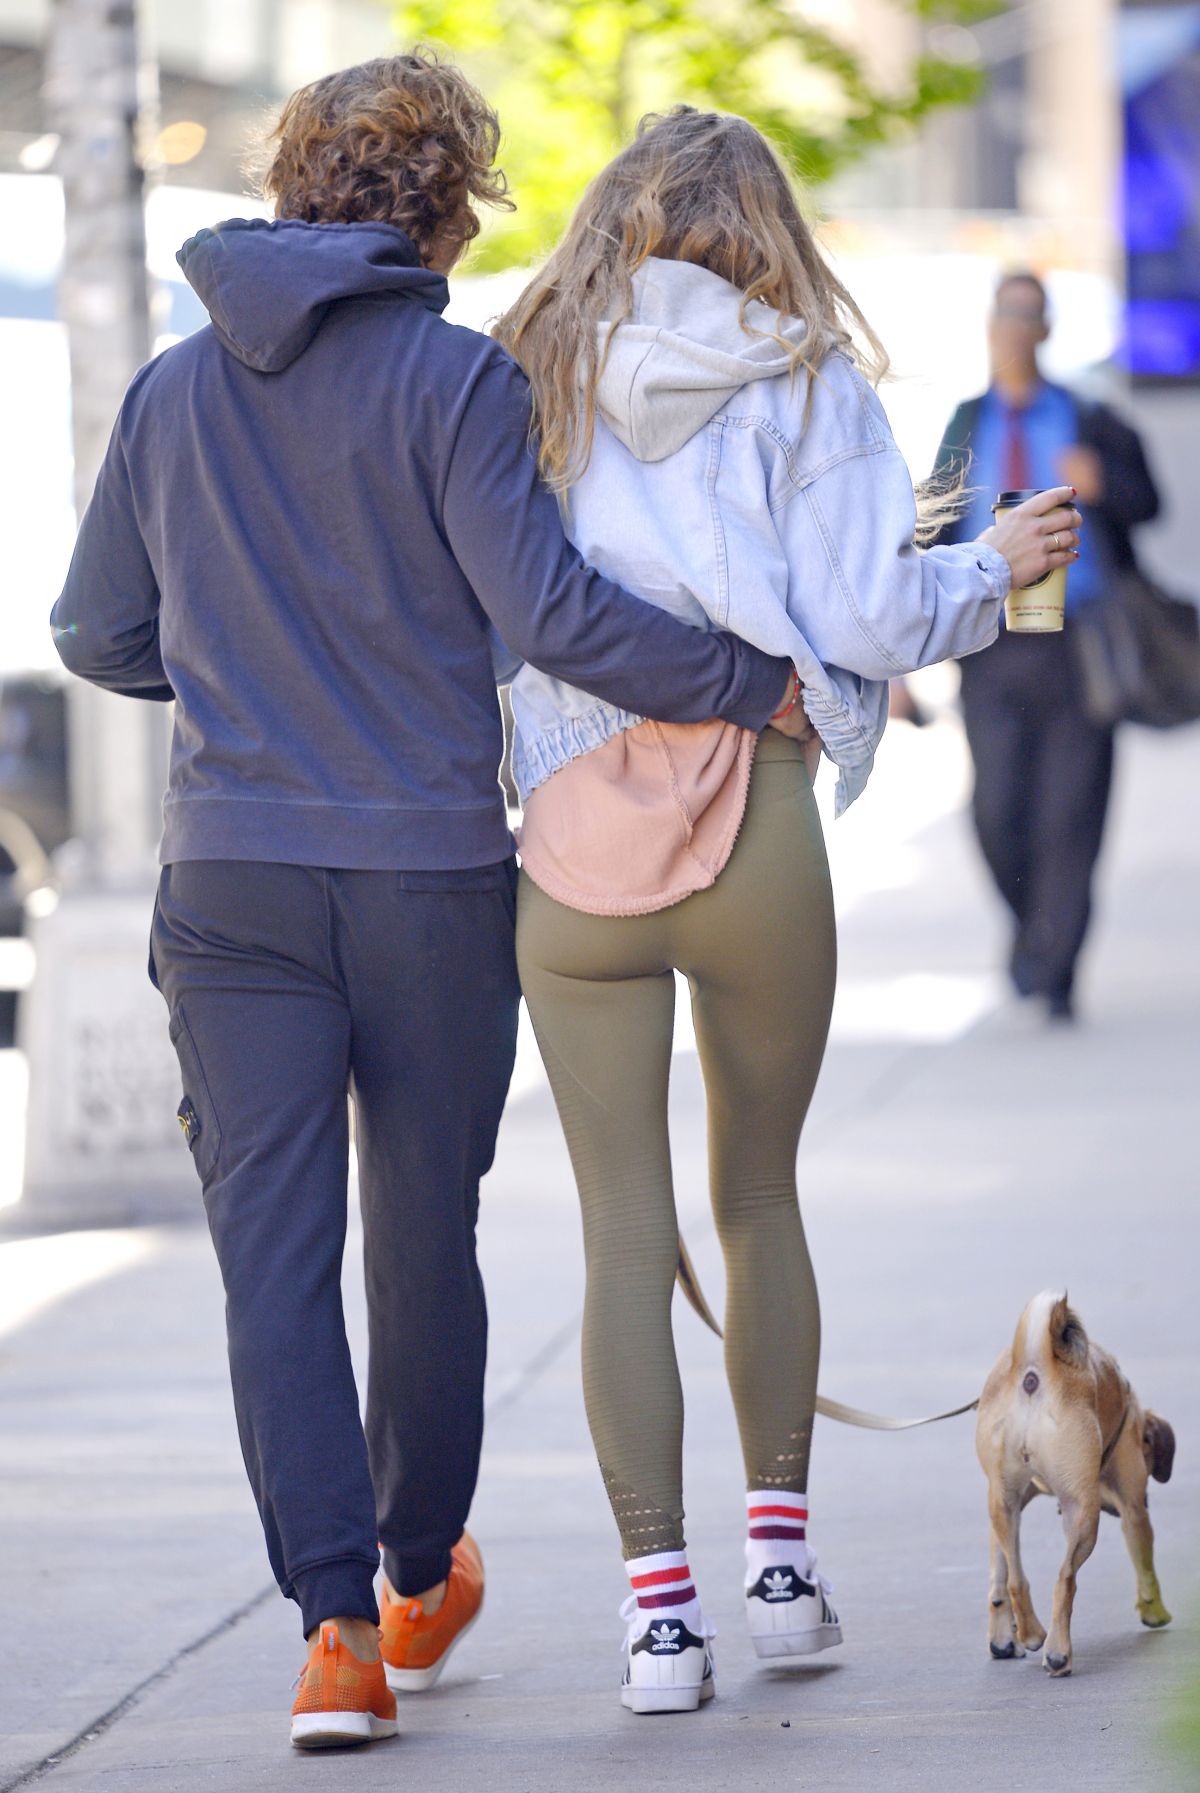 nina-agdal-and-jack-brinkley-with-their-dog-out-in-new-york-04-24-2019-0.jpg